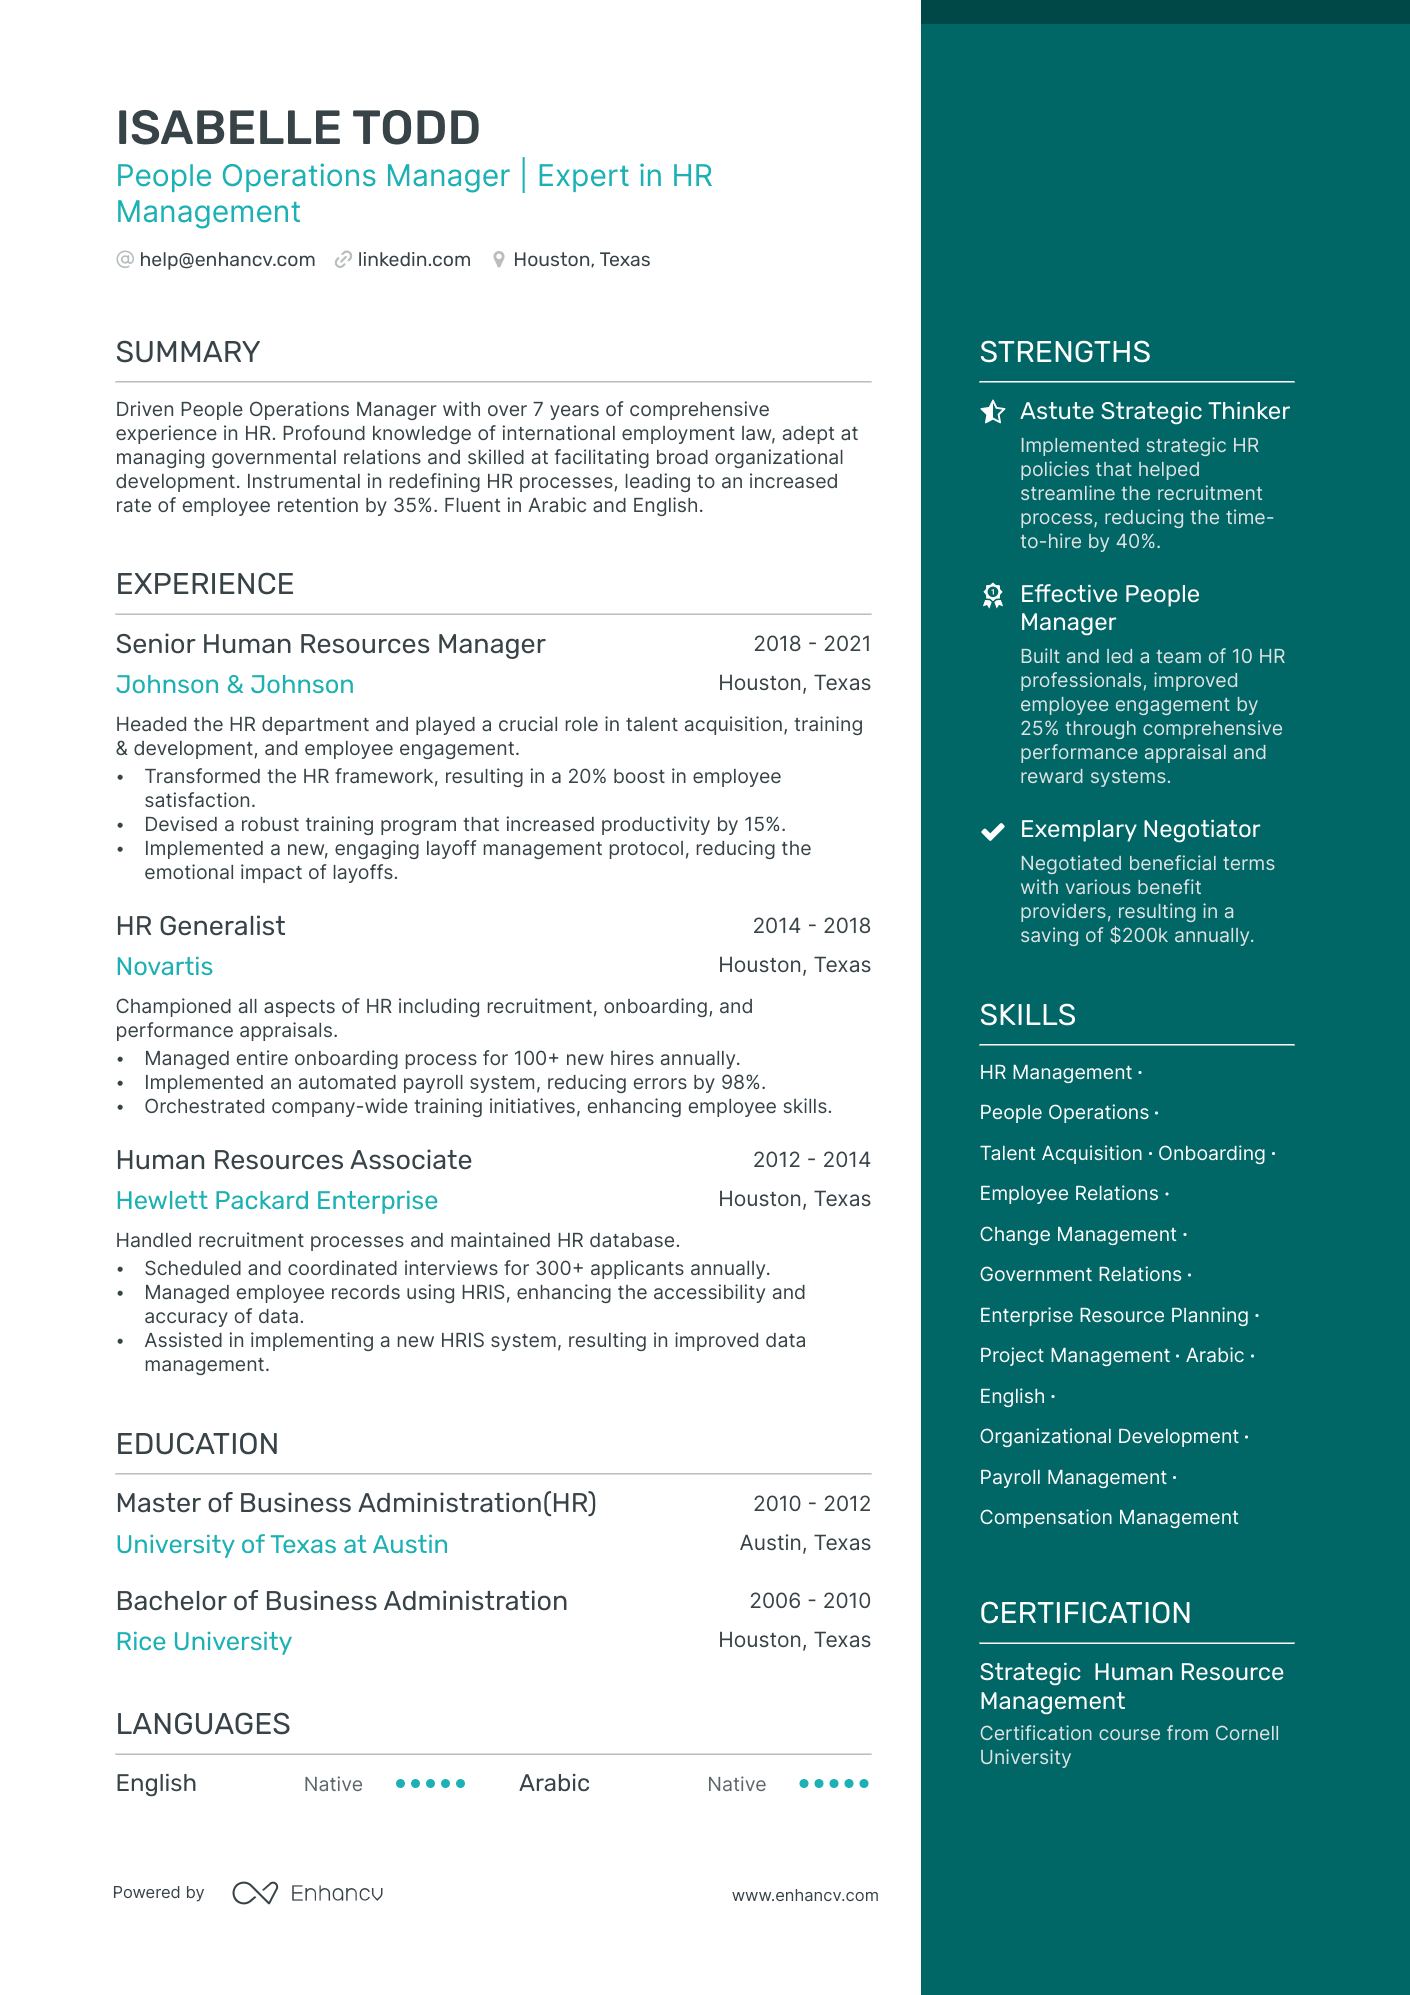 People Operations Manager resume example